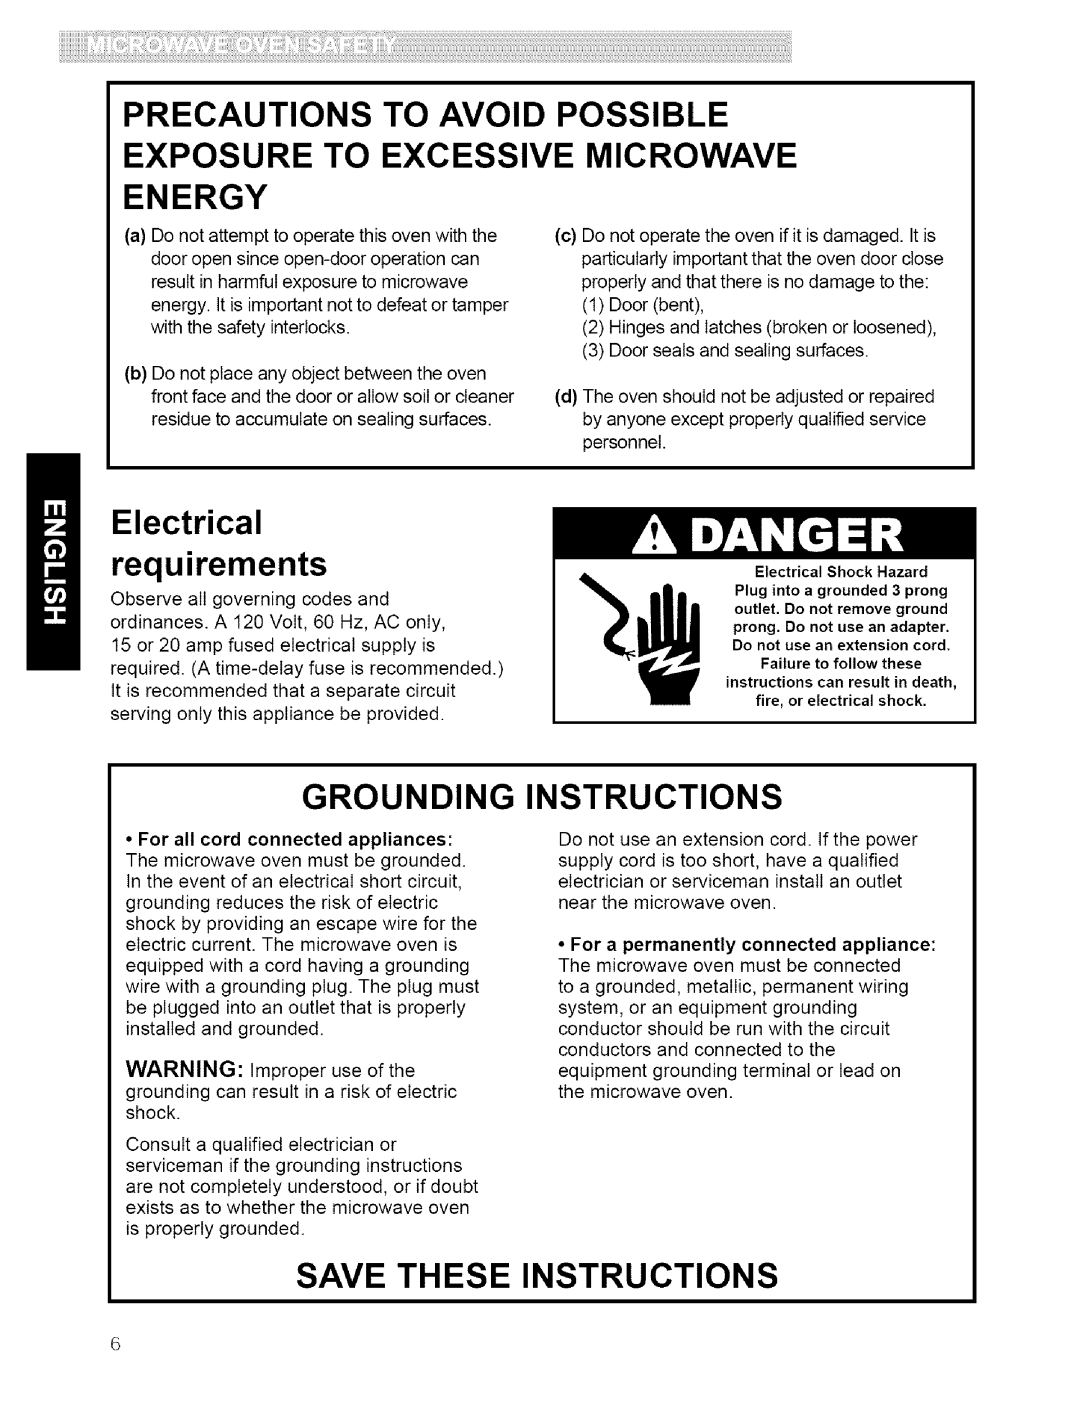 Kenmore 721.80412, 721.80599, 721.80594 Energy, Electrical requirements, Grounding Instructions, Save These Instructions 